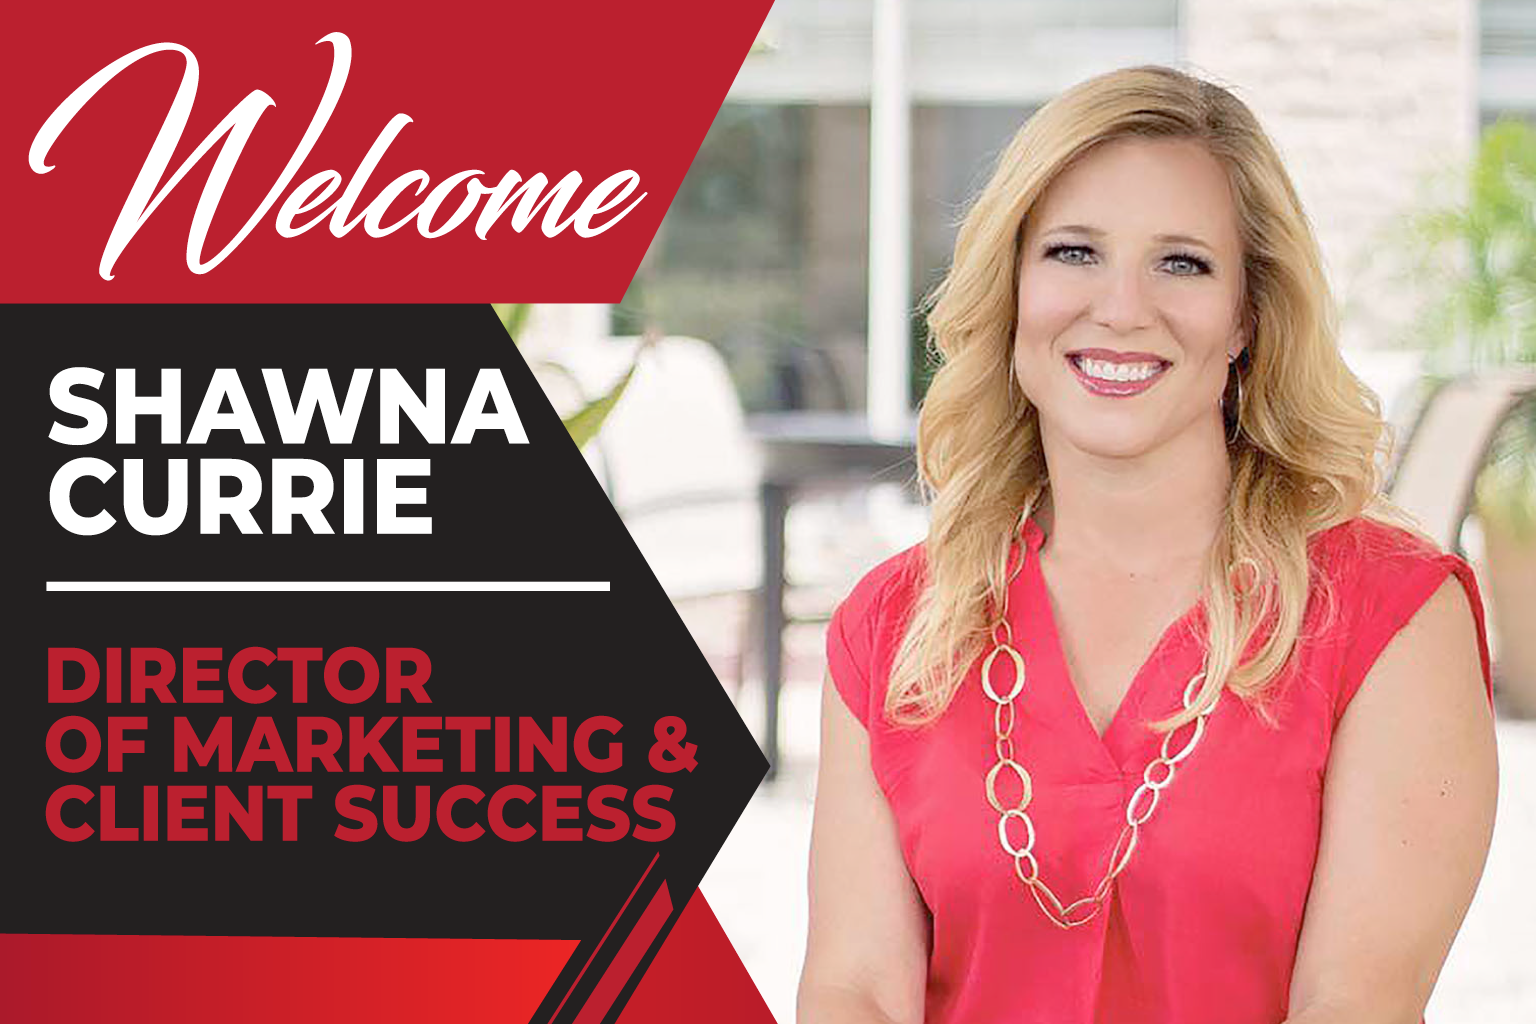 Shawna Currie joins the team as the Director of Marketing and Client Success!